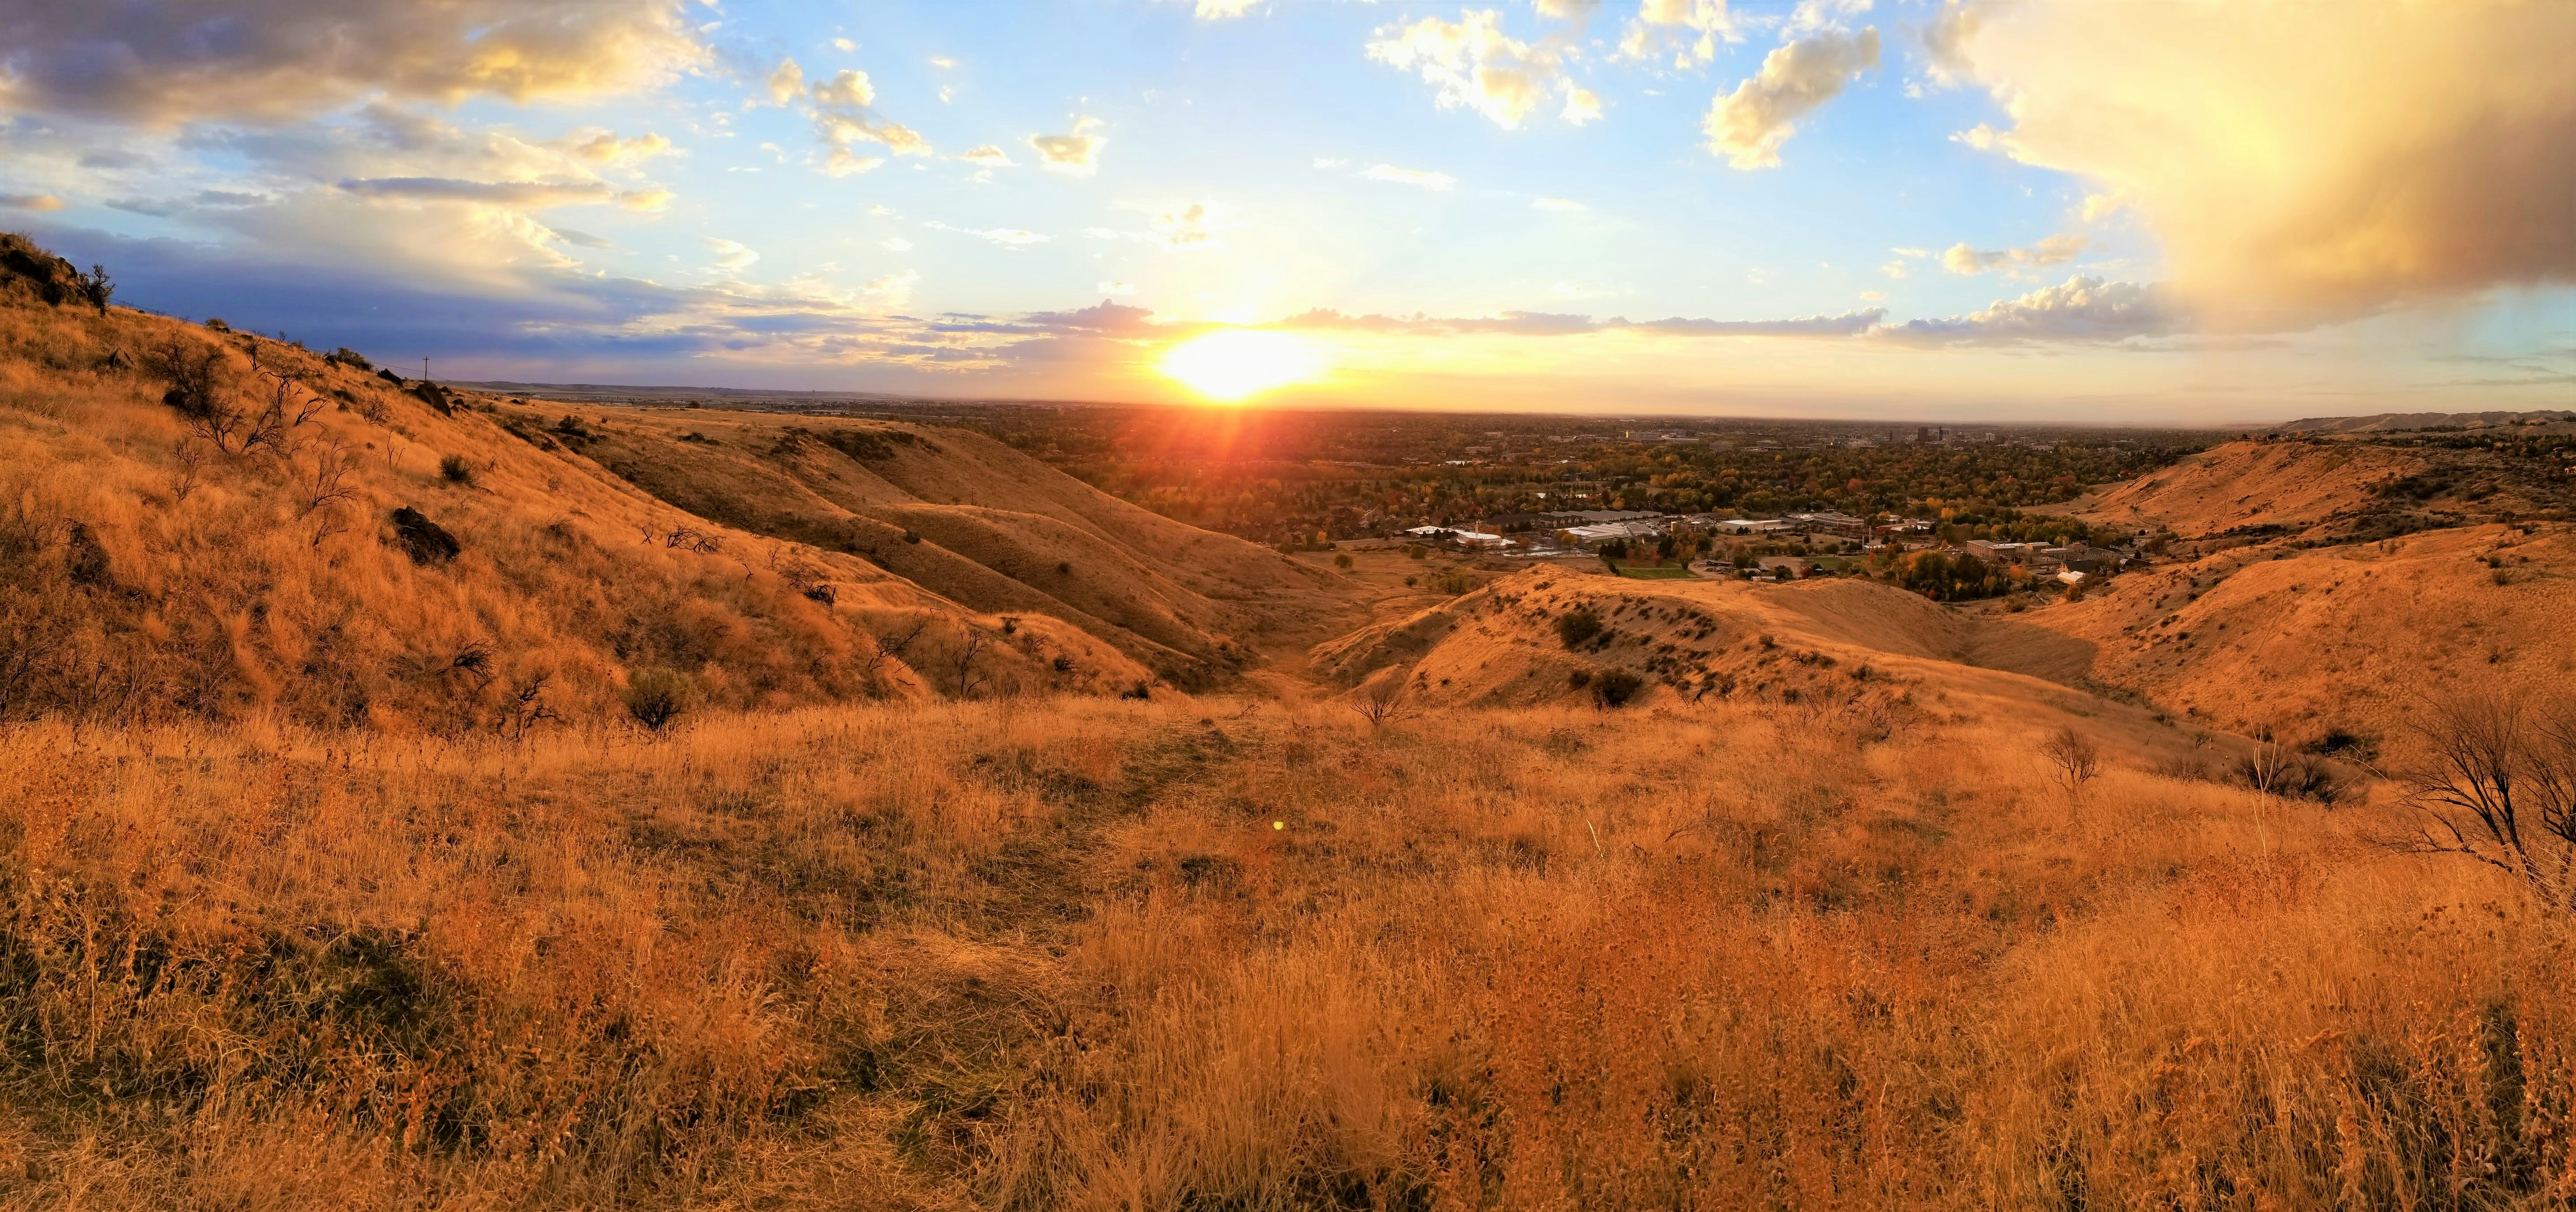 What to See in Boise: Travel Guide